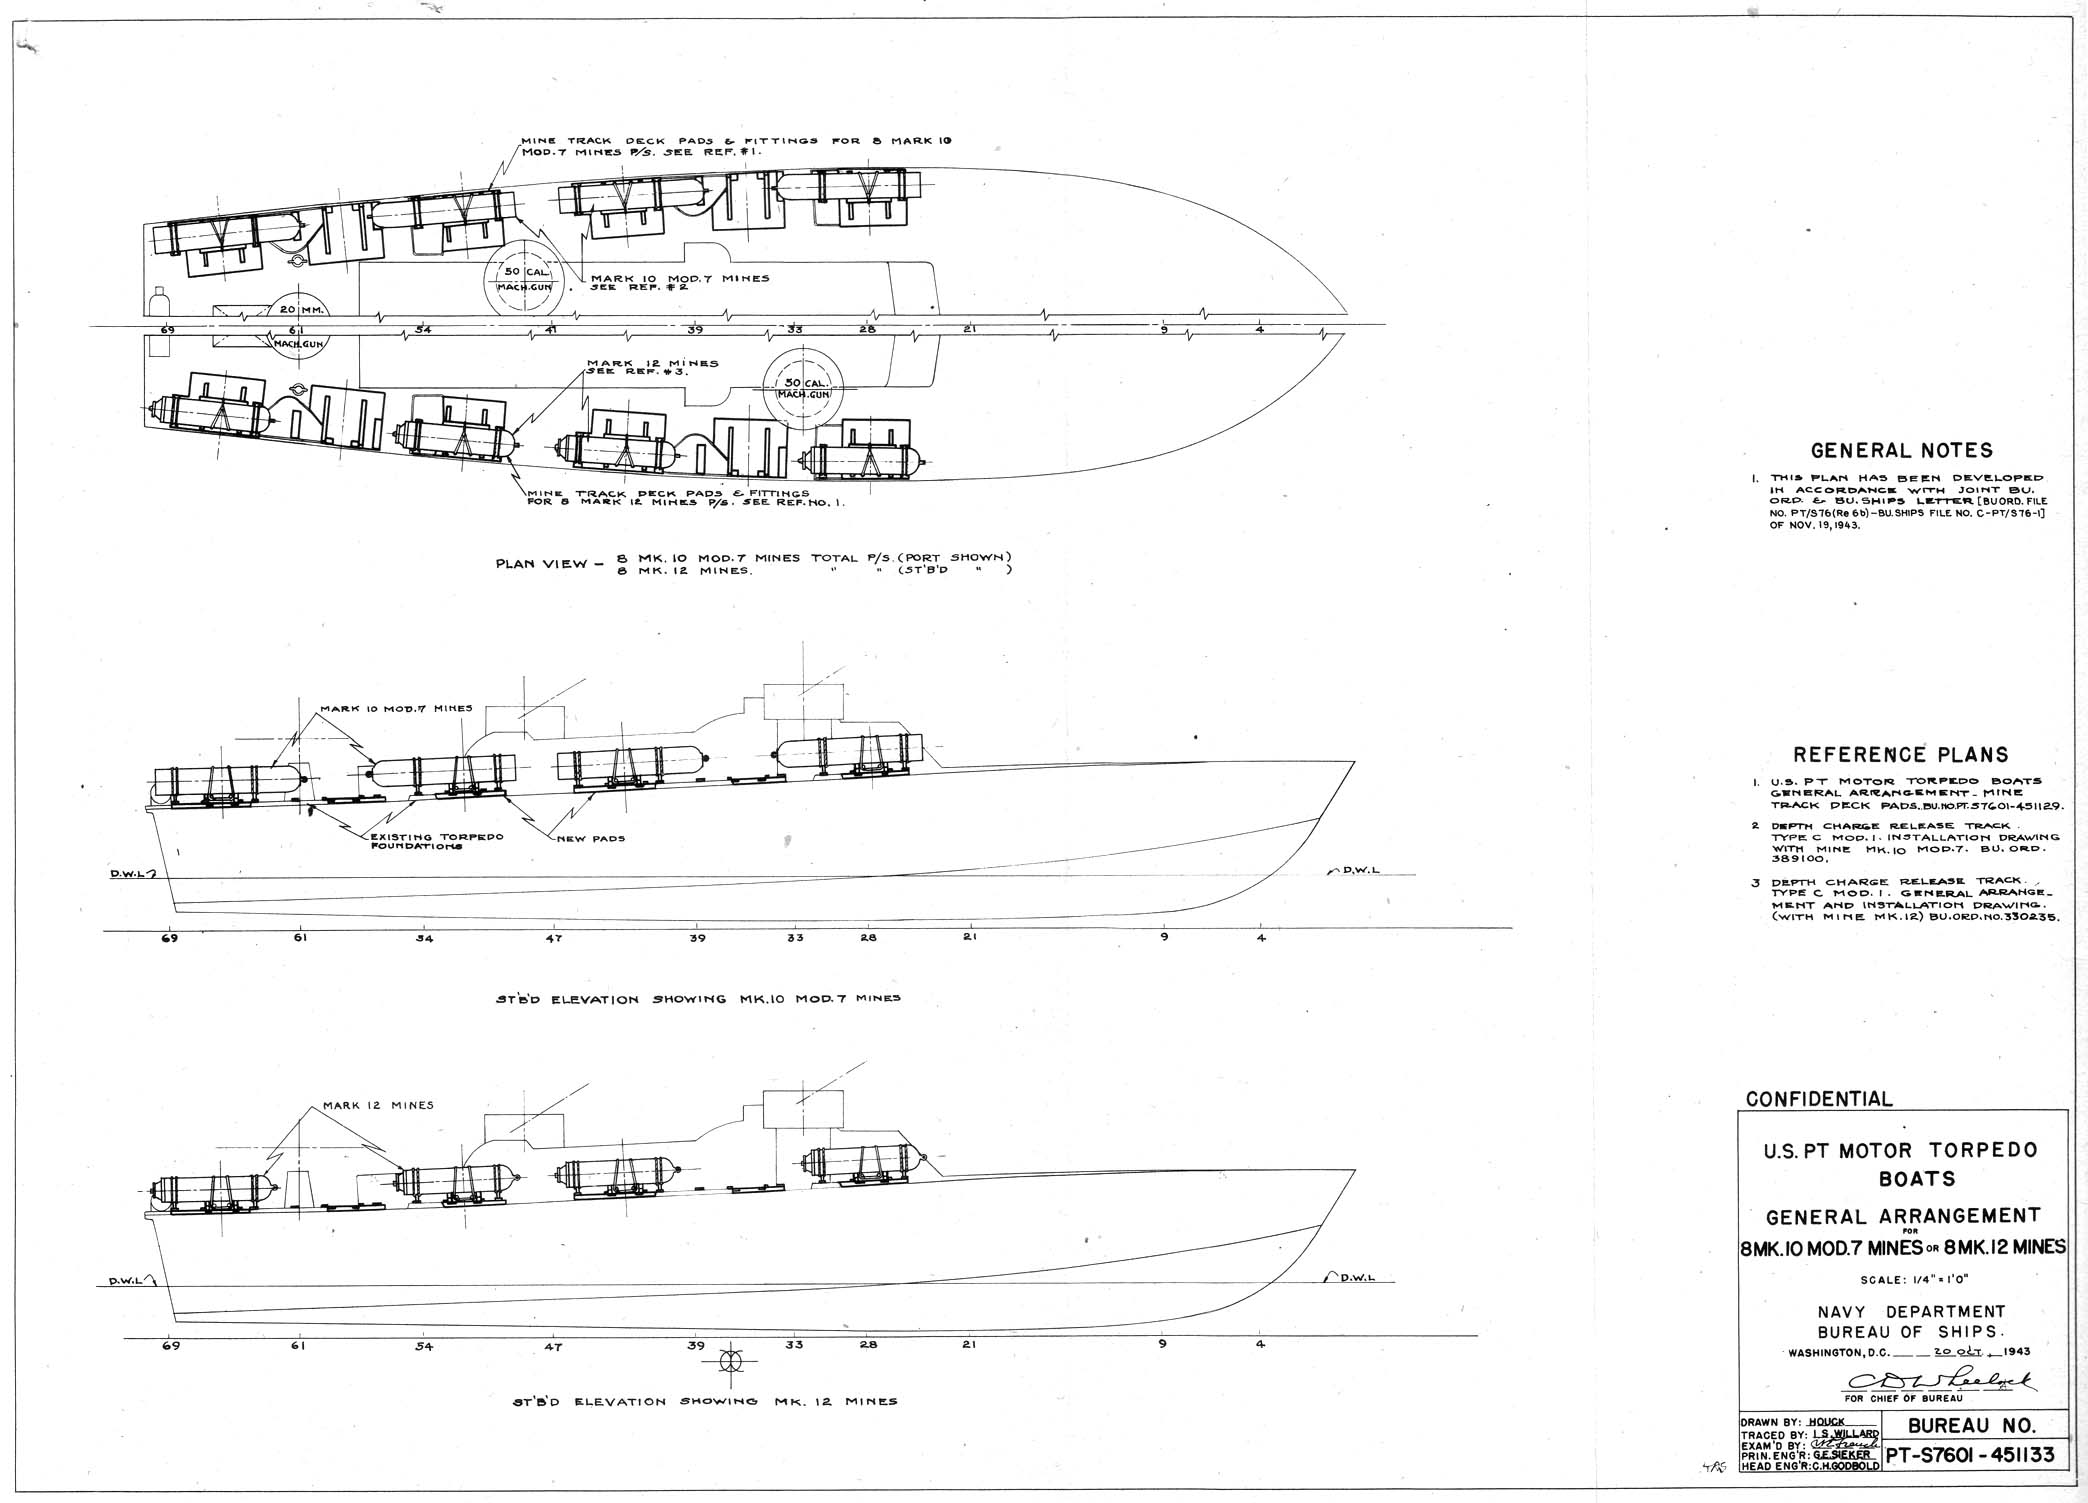 Researcher@Large - 1943 Minelaying for PT boats Memo